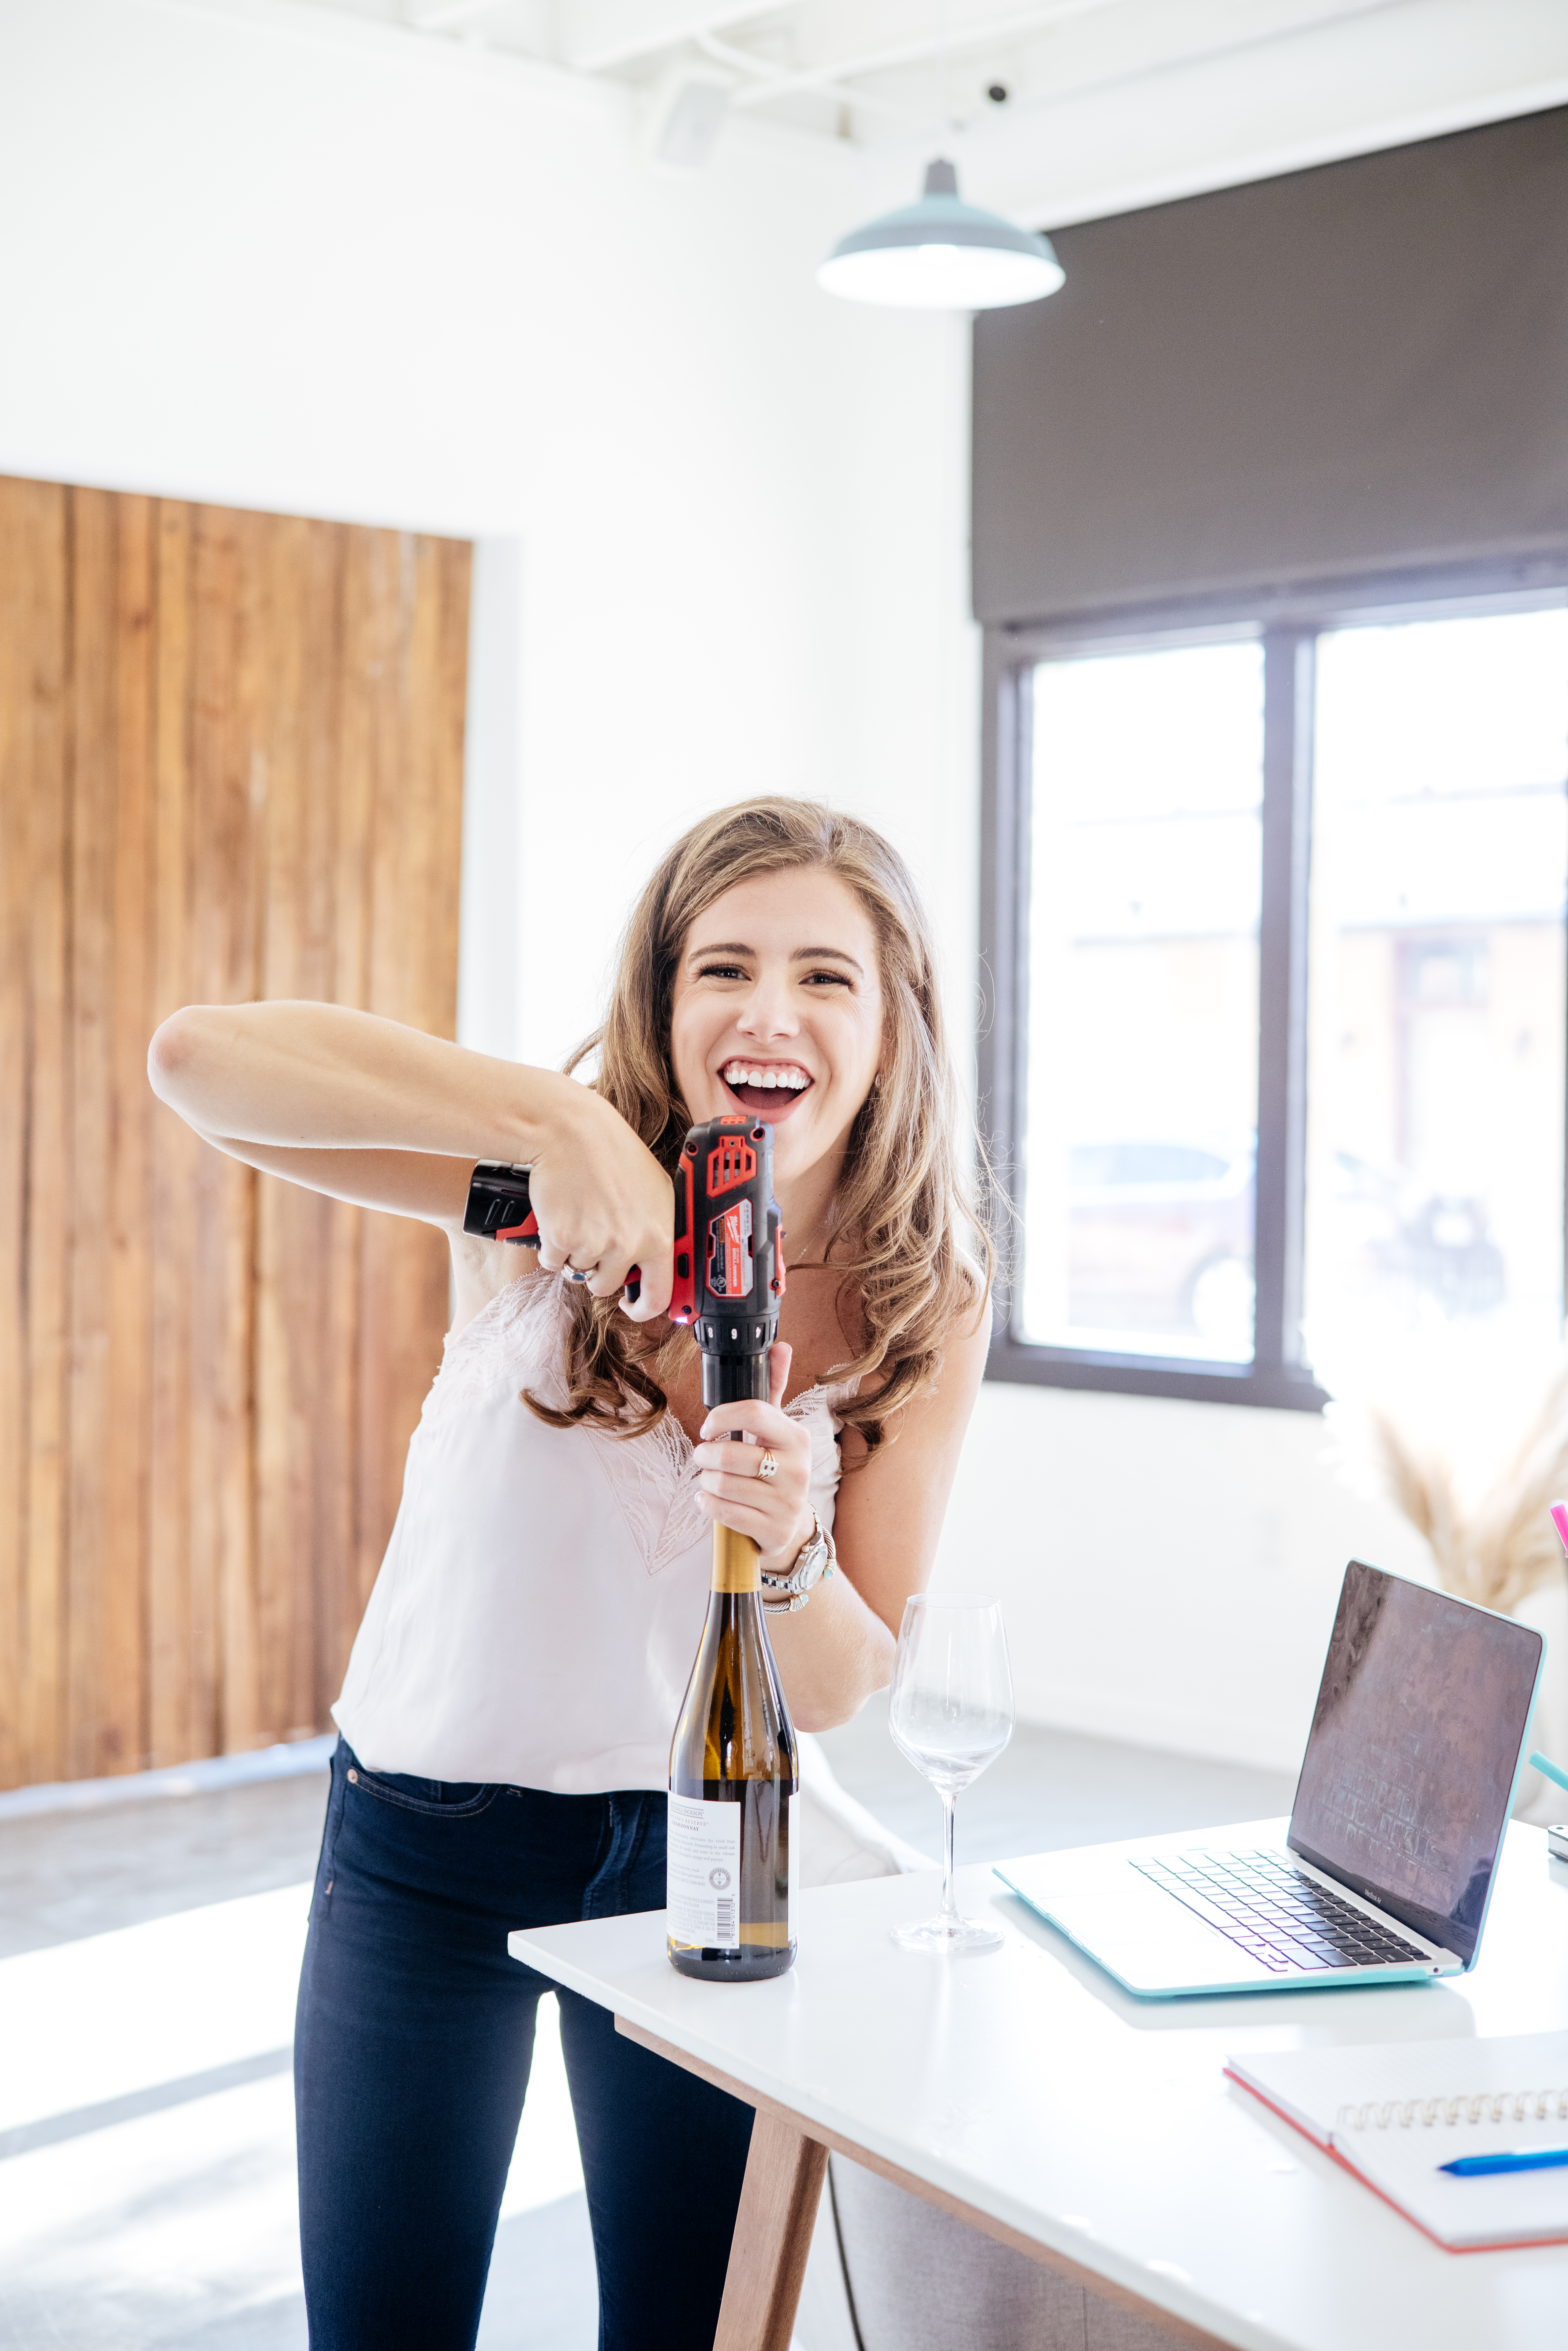 Loan Officer, Realtor, and Investor Katherine Blazer. Click here to be inspired by this realtor's clean, fun personal branding photoshoot!